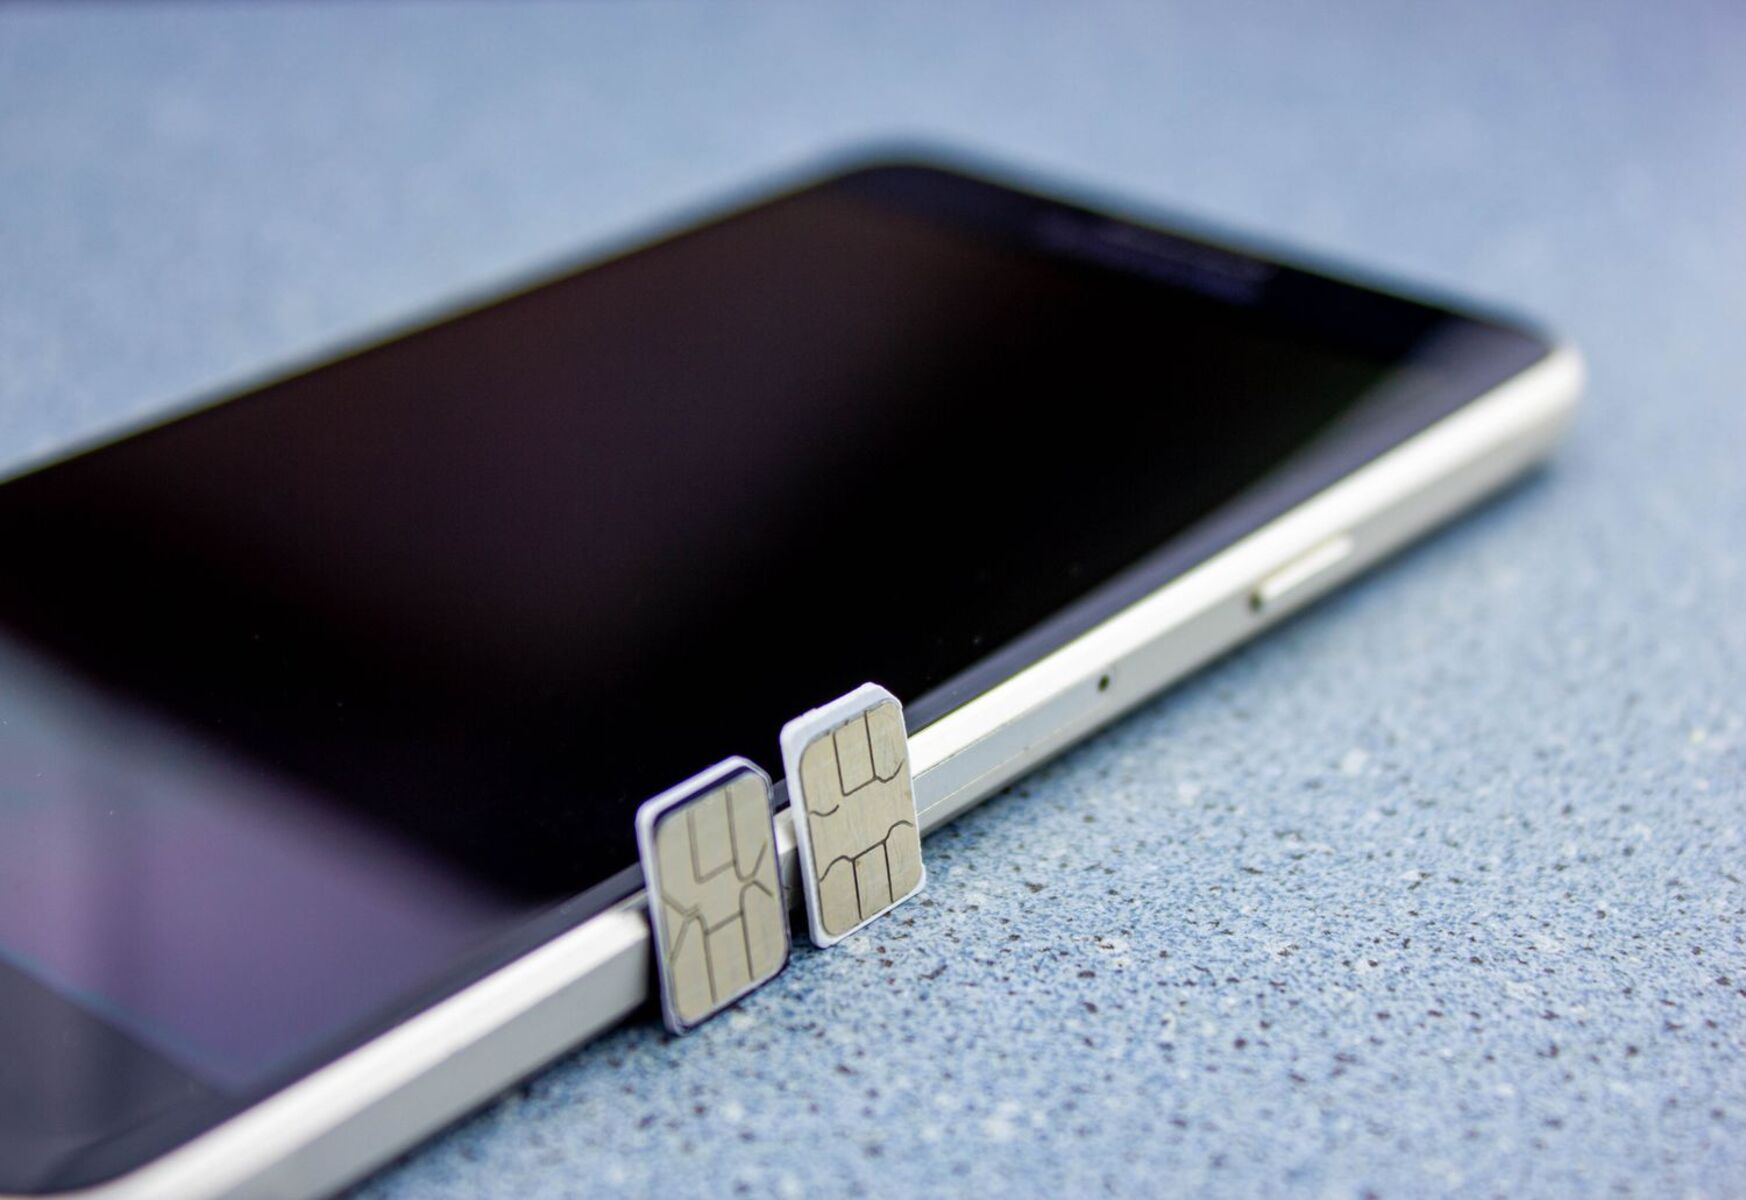 Timing Guide For Transferring SIM Card To A New Phone